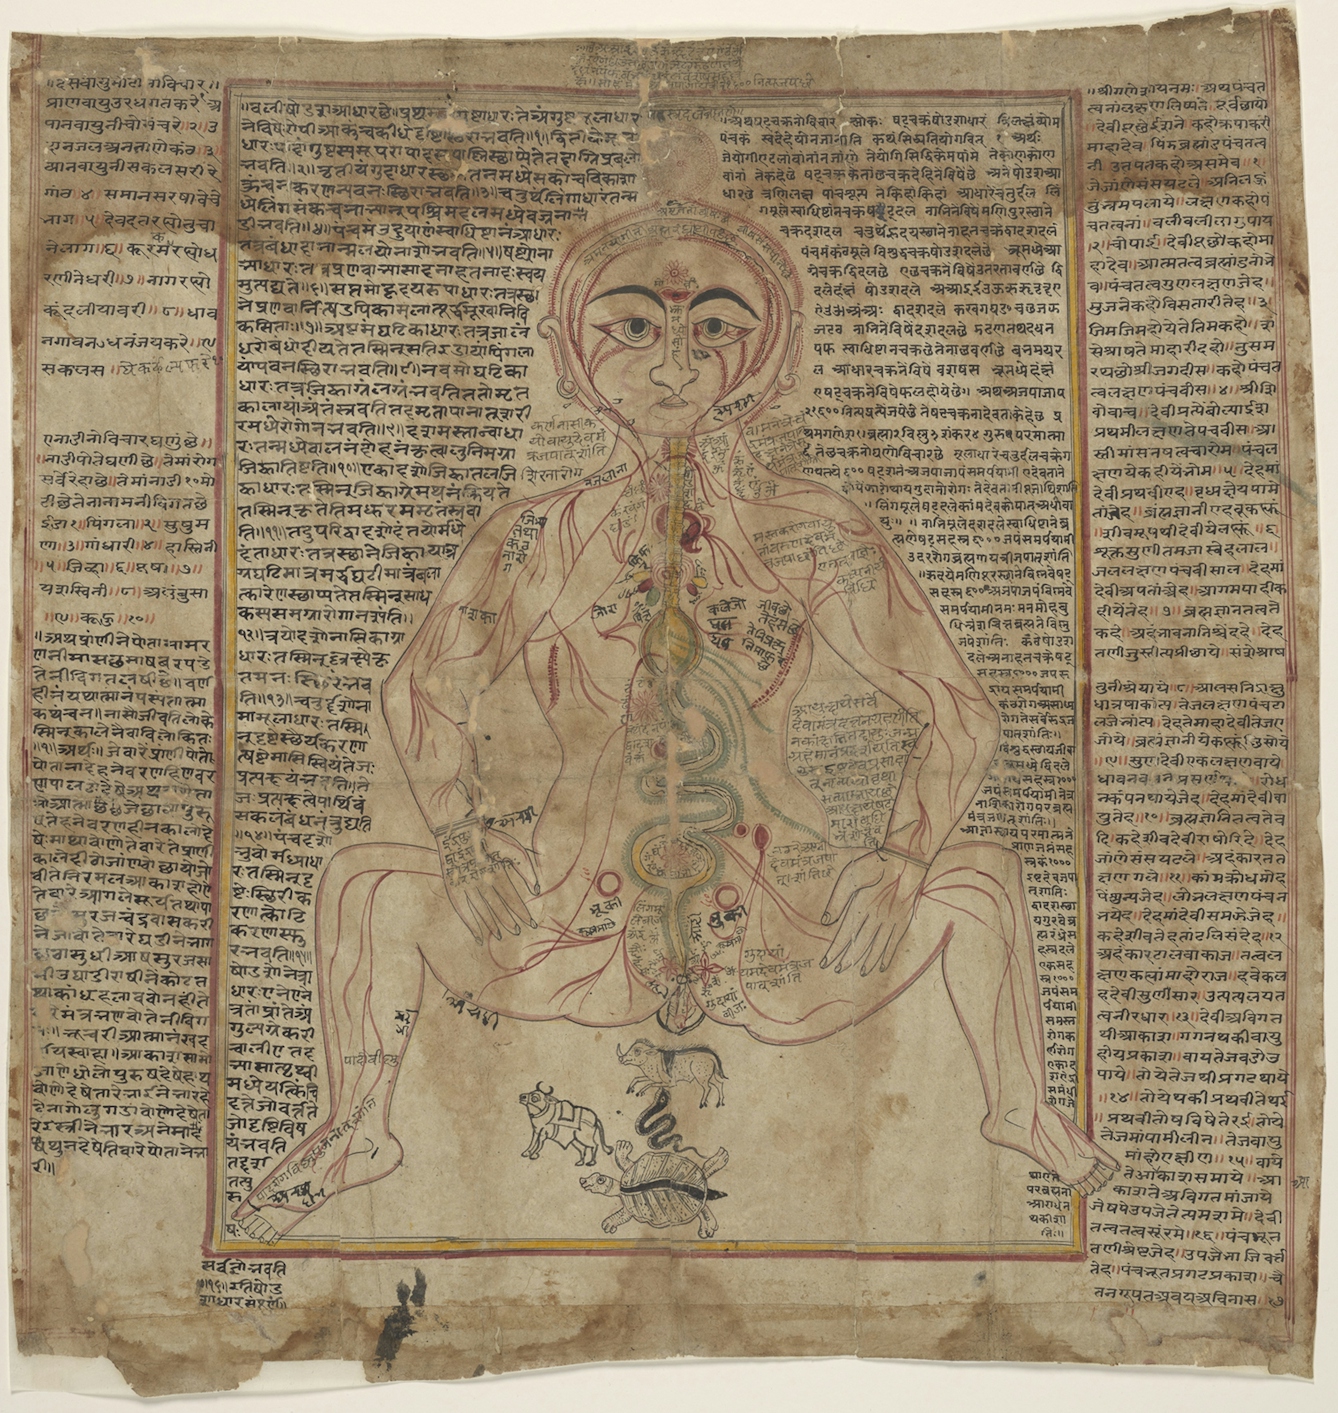 A colour anatomical drawing of a human body, seated with legs bent and open, is surrounded by text, written in Sanskrit and Old Gujarati.